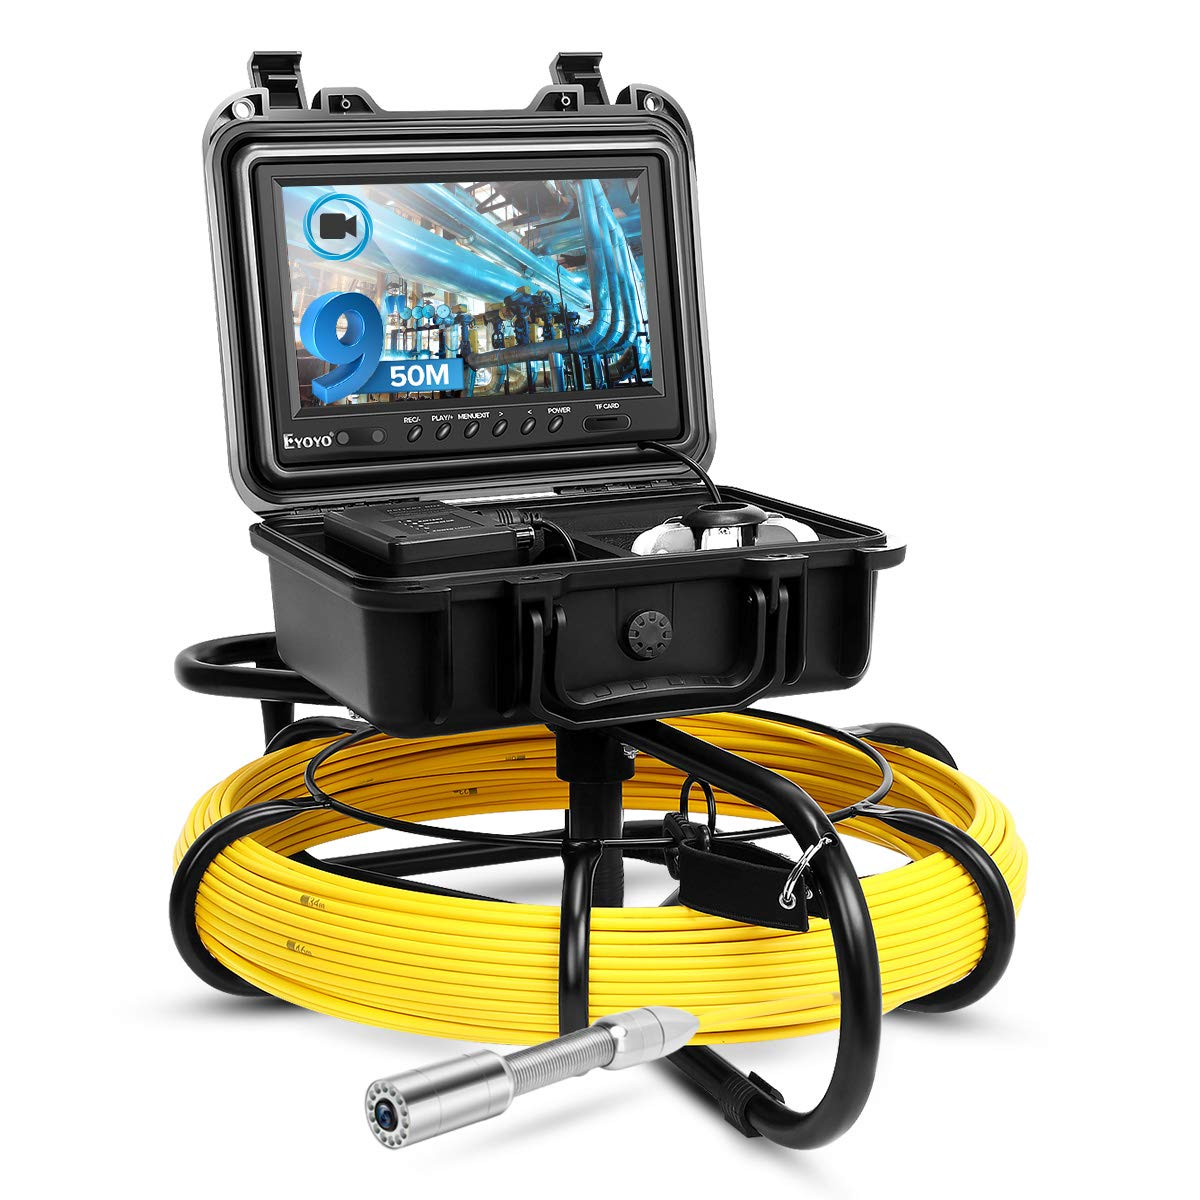 15m/50 Pipe Inspection Camera Endoscope Video Ft Sewer Drain Cleaner Waterproof 